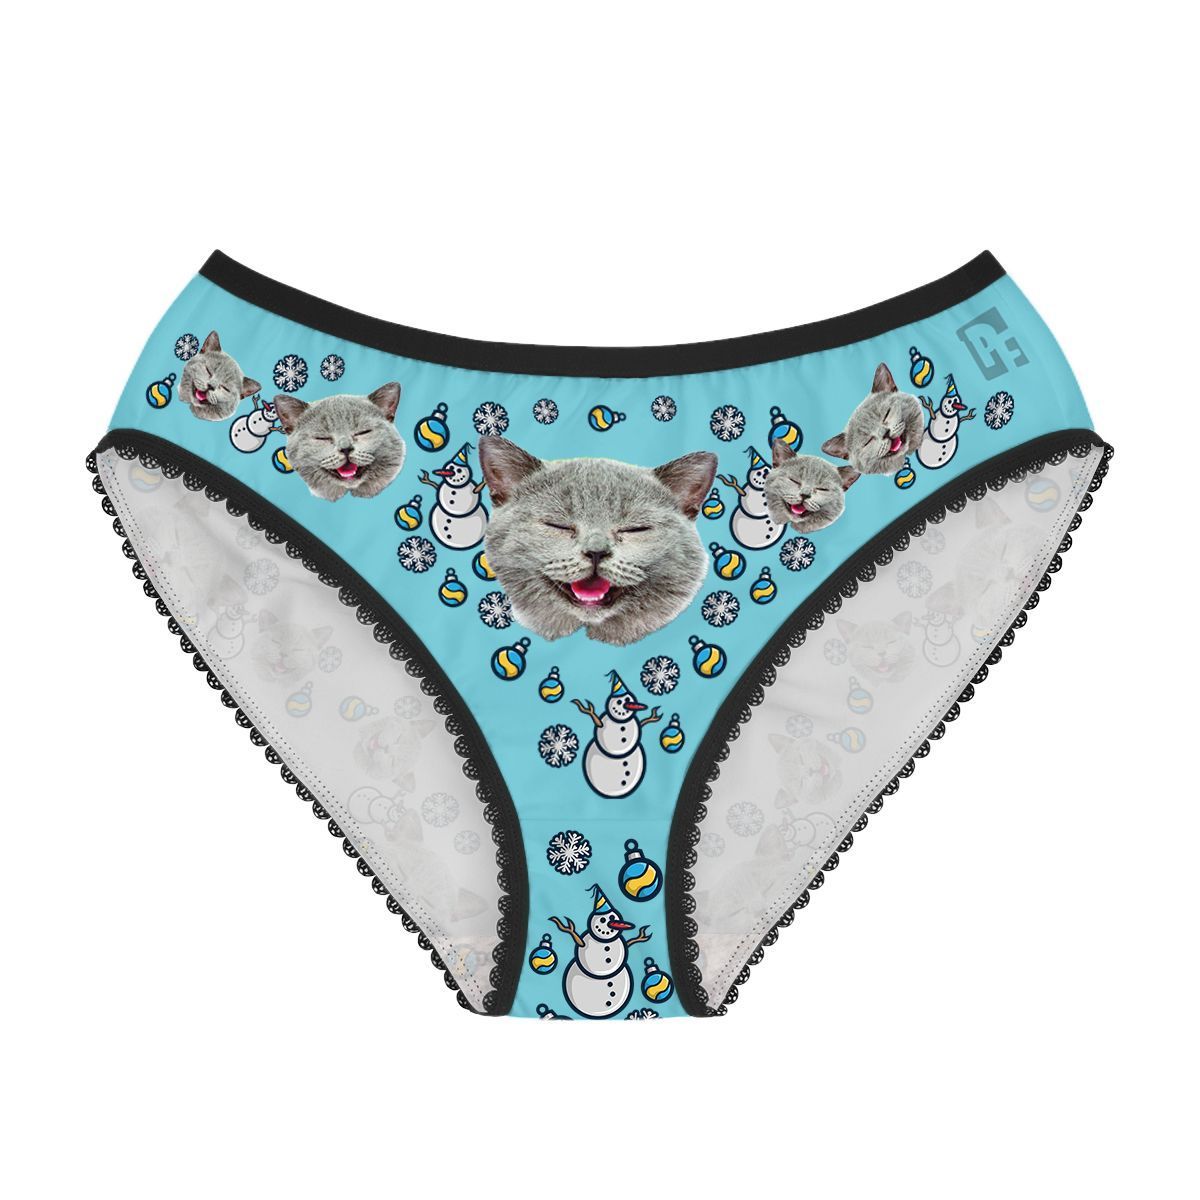 Blue Snowman women's underwear briefs personalized with photo printed on them